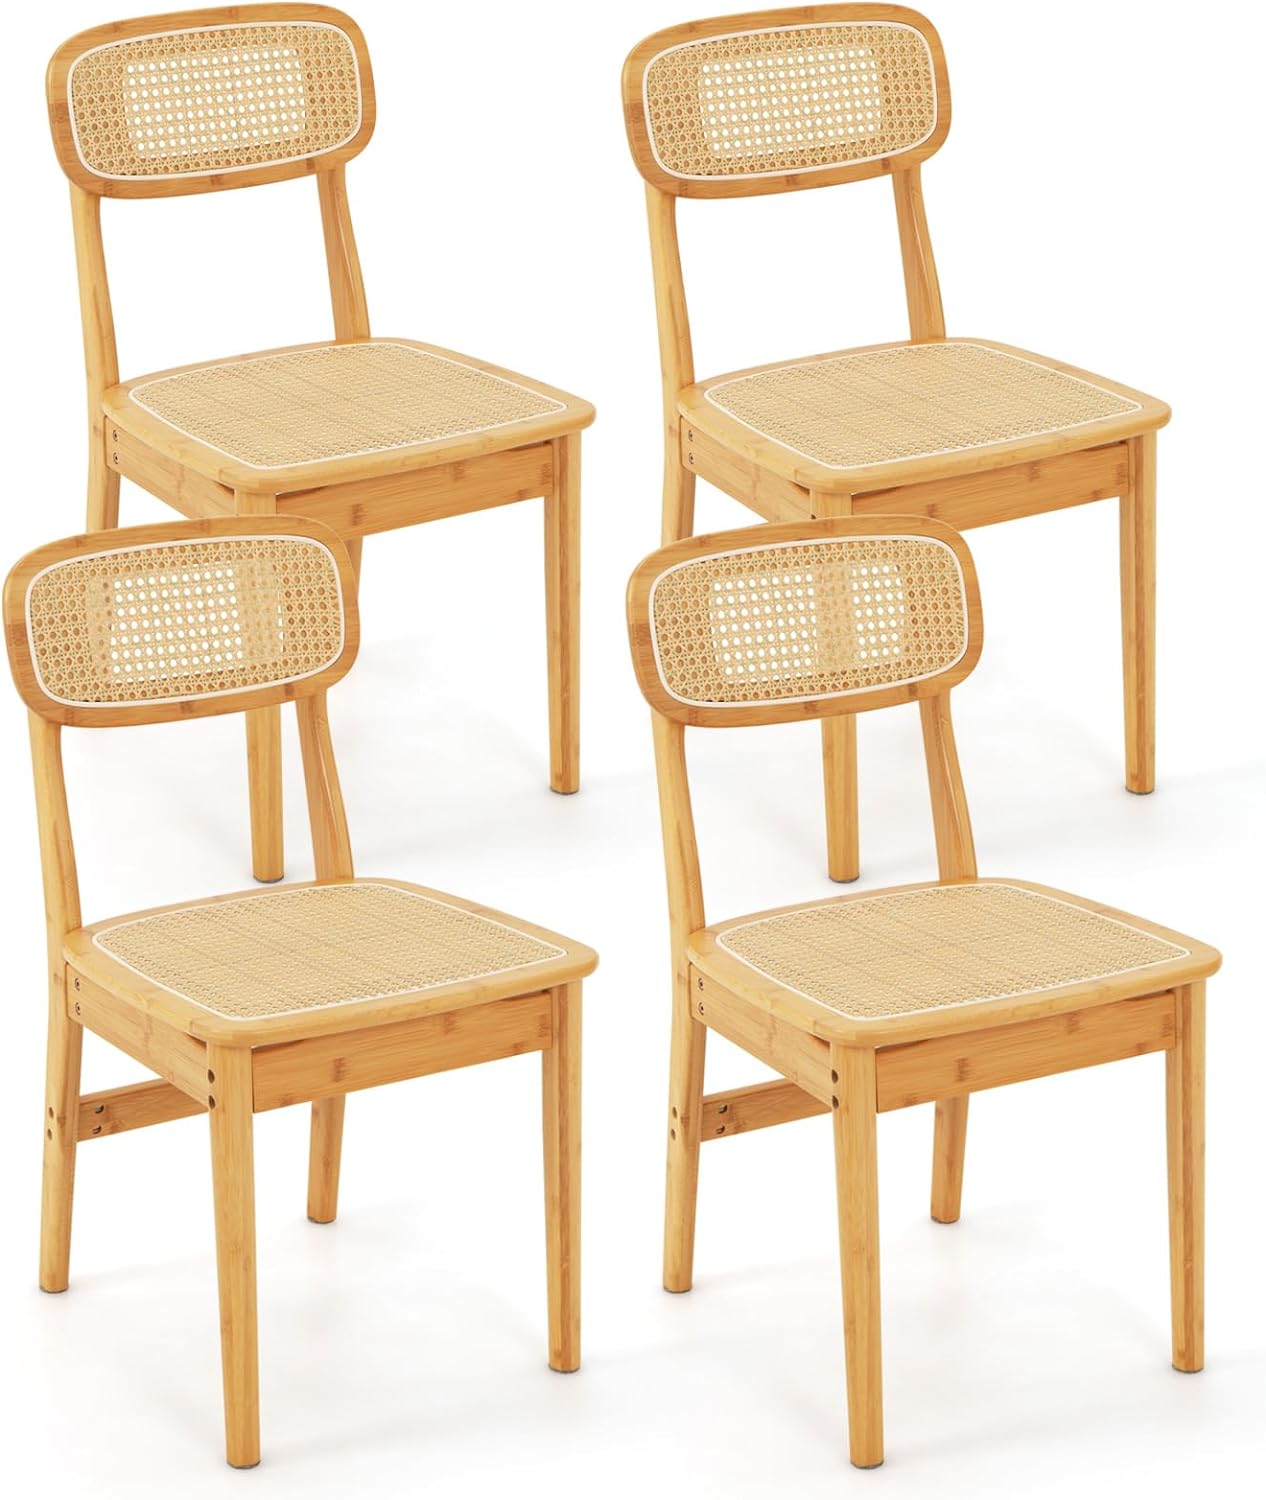 Giantex Rattan Dining Chairs Set of 2, Boho Cane Kitchen Chairs, Max Load 300 Lbs